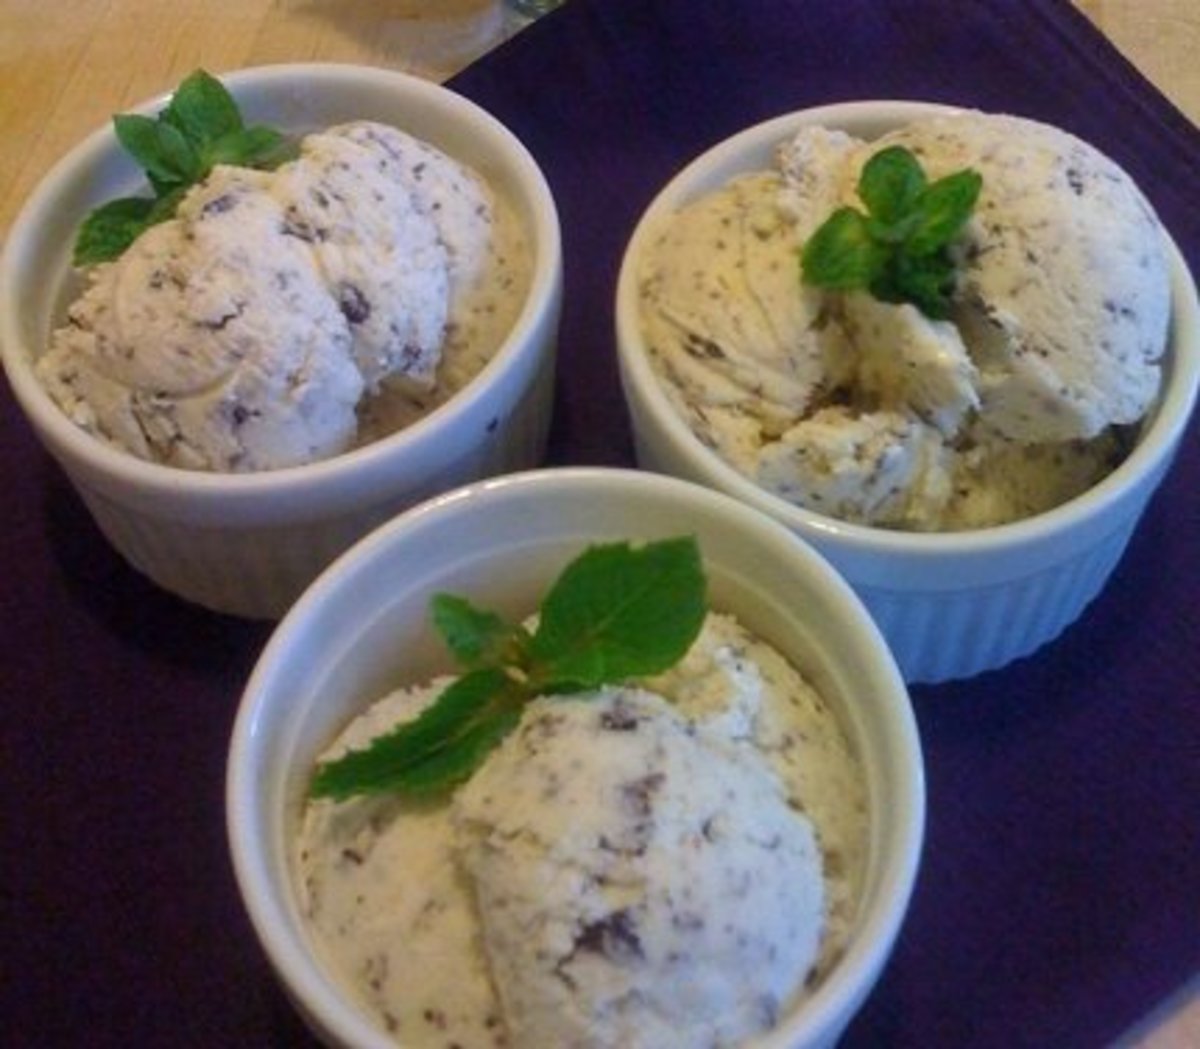 This is one of my sweetheart's favorite recipes. Nothing beats the combination of creamy vanilla, chocolate, and mint.